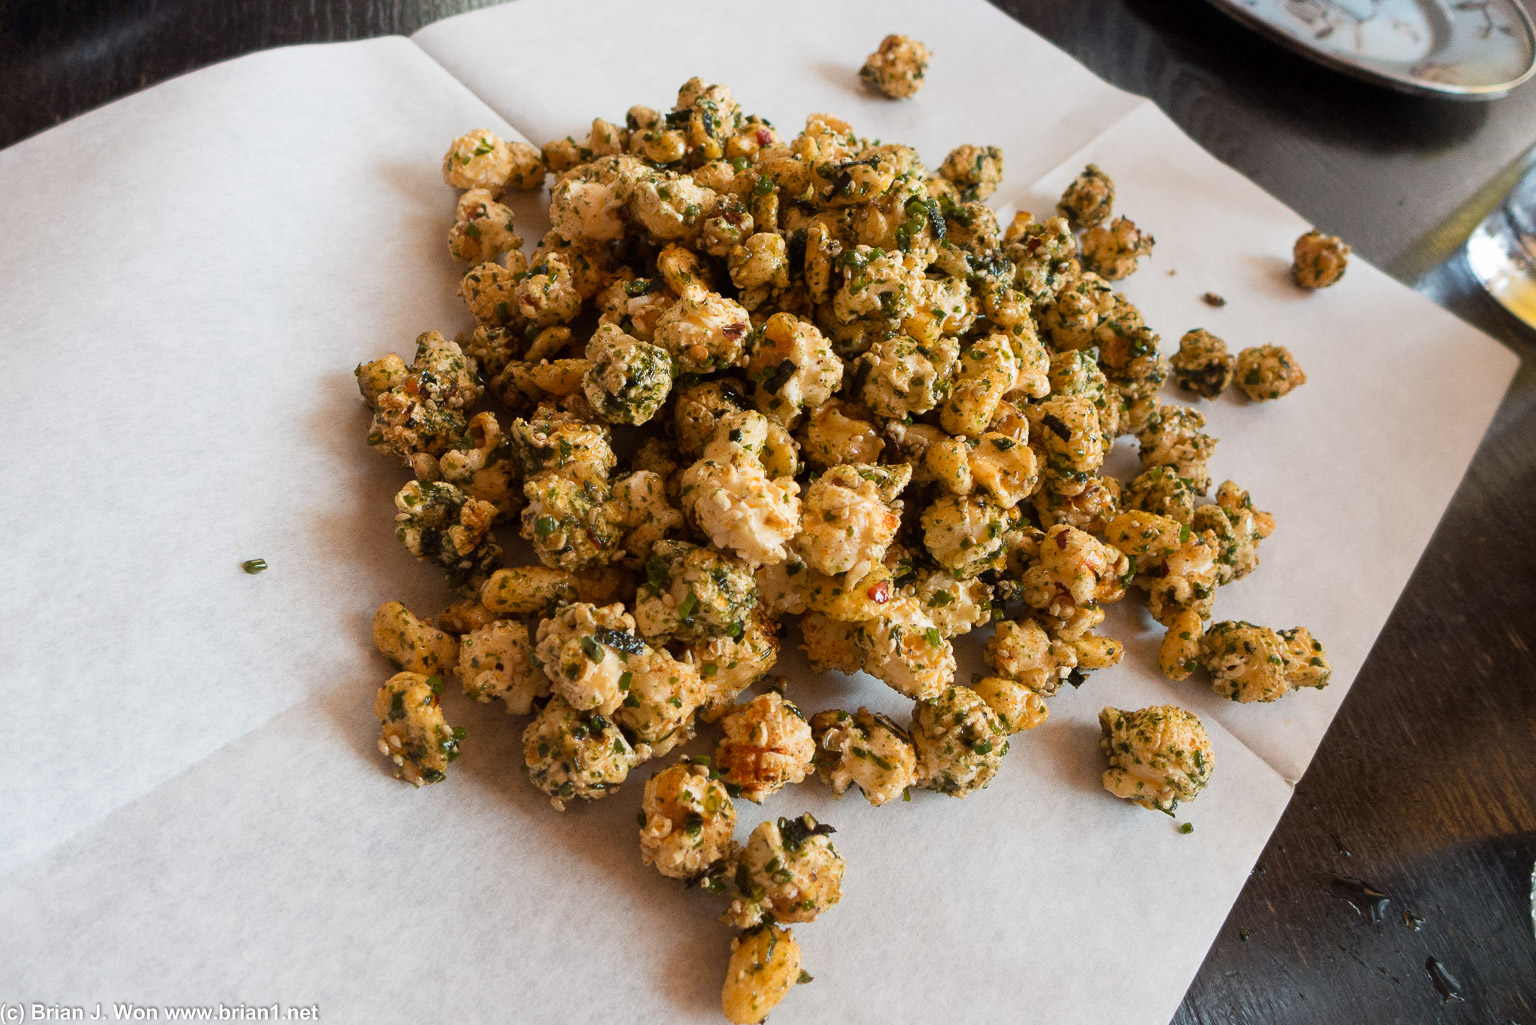 Furikake kettle corn. Seaweed and corn pops added, good but a bit intense after a while.